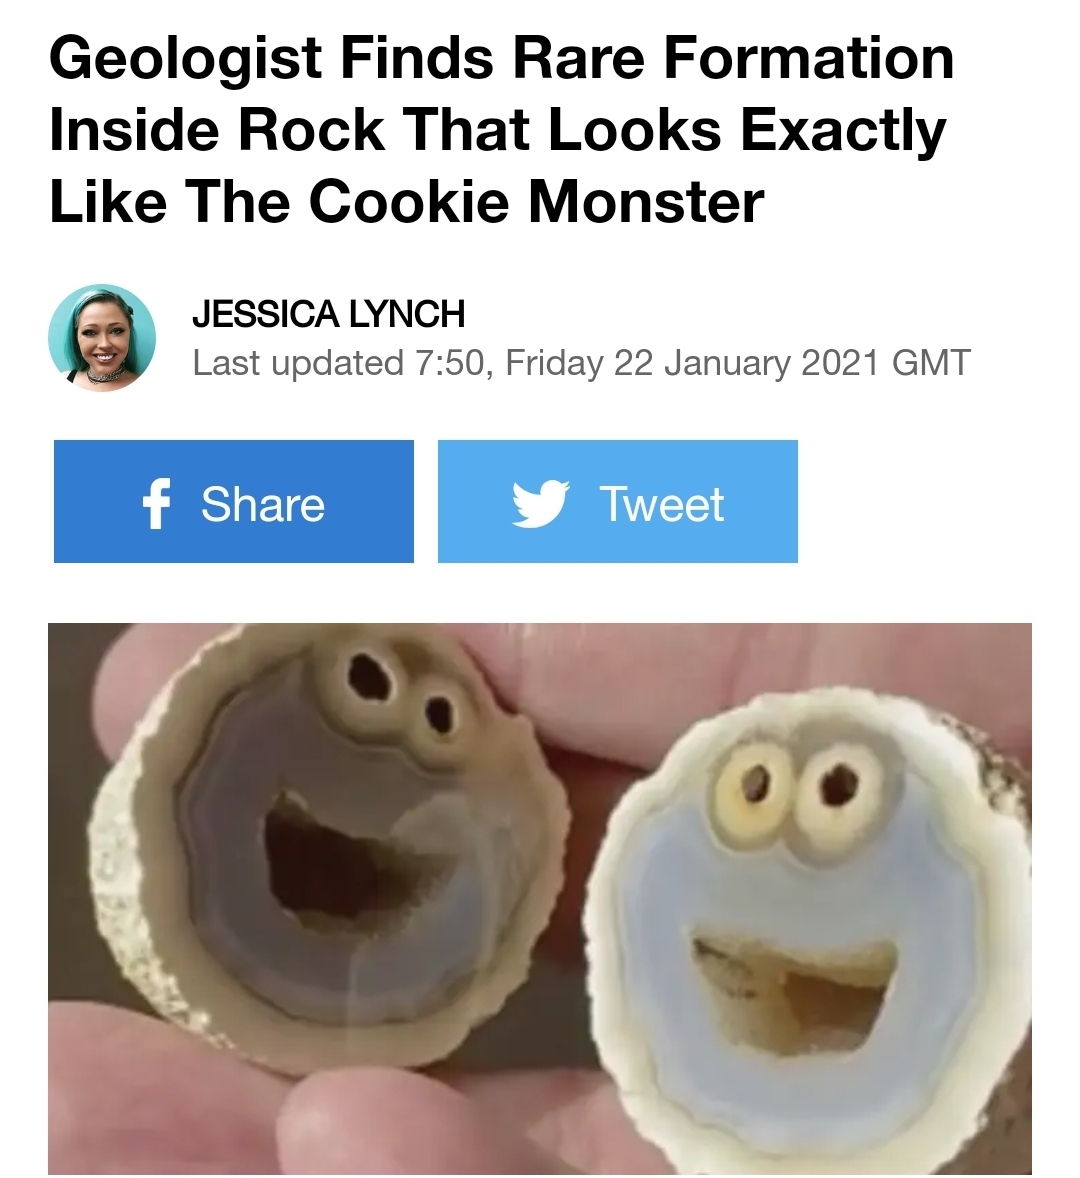 smile - Geologist Finds Rare Formation Inside Rock That Looks Exactly The Cookie Monster Jessica Lynch Last updated , Friday Gmt f Tweet